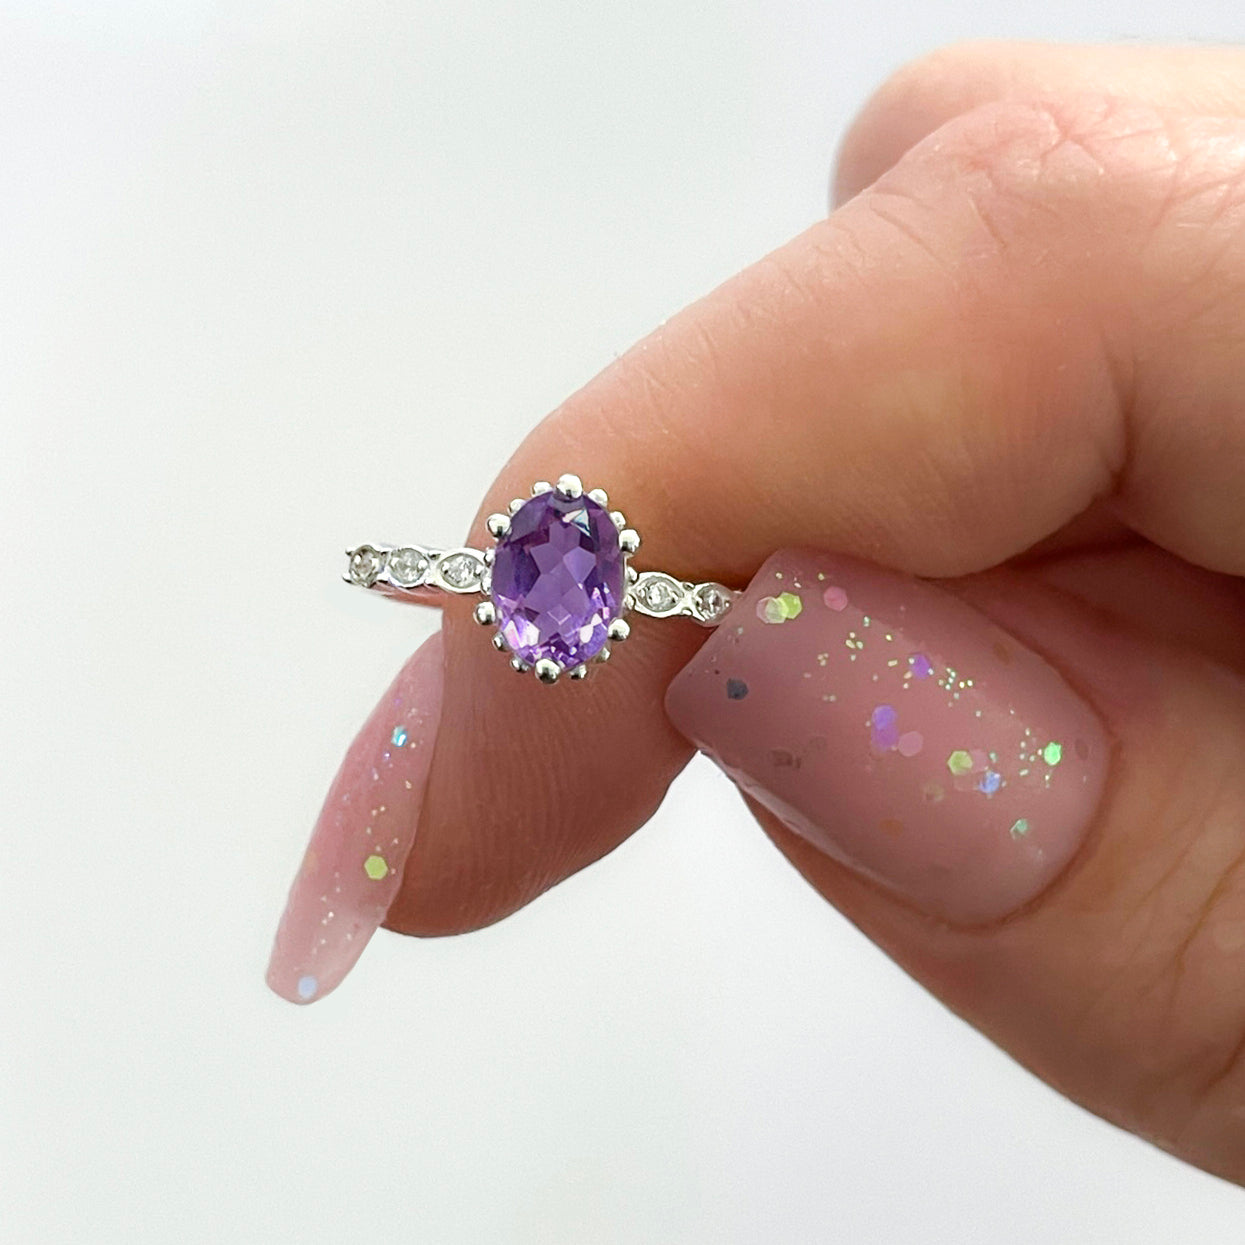 Juliet Ring - Amethyst and White Topaz